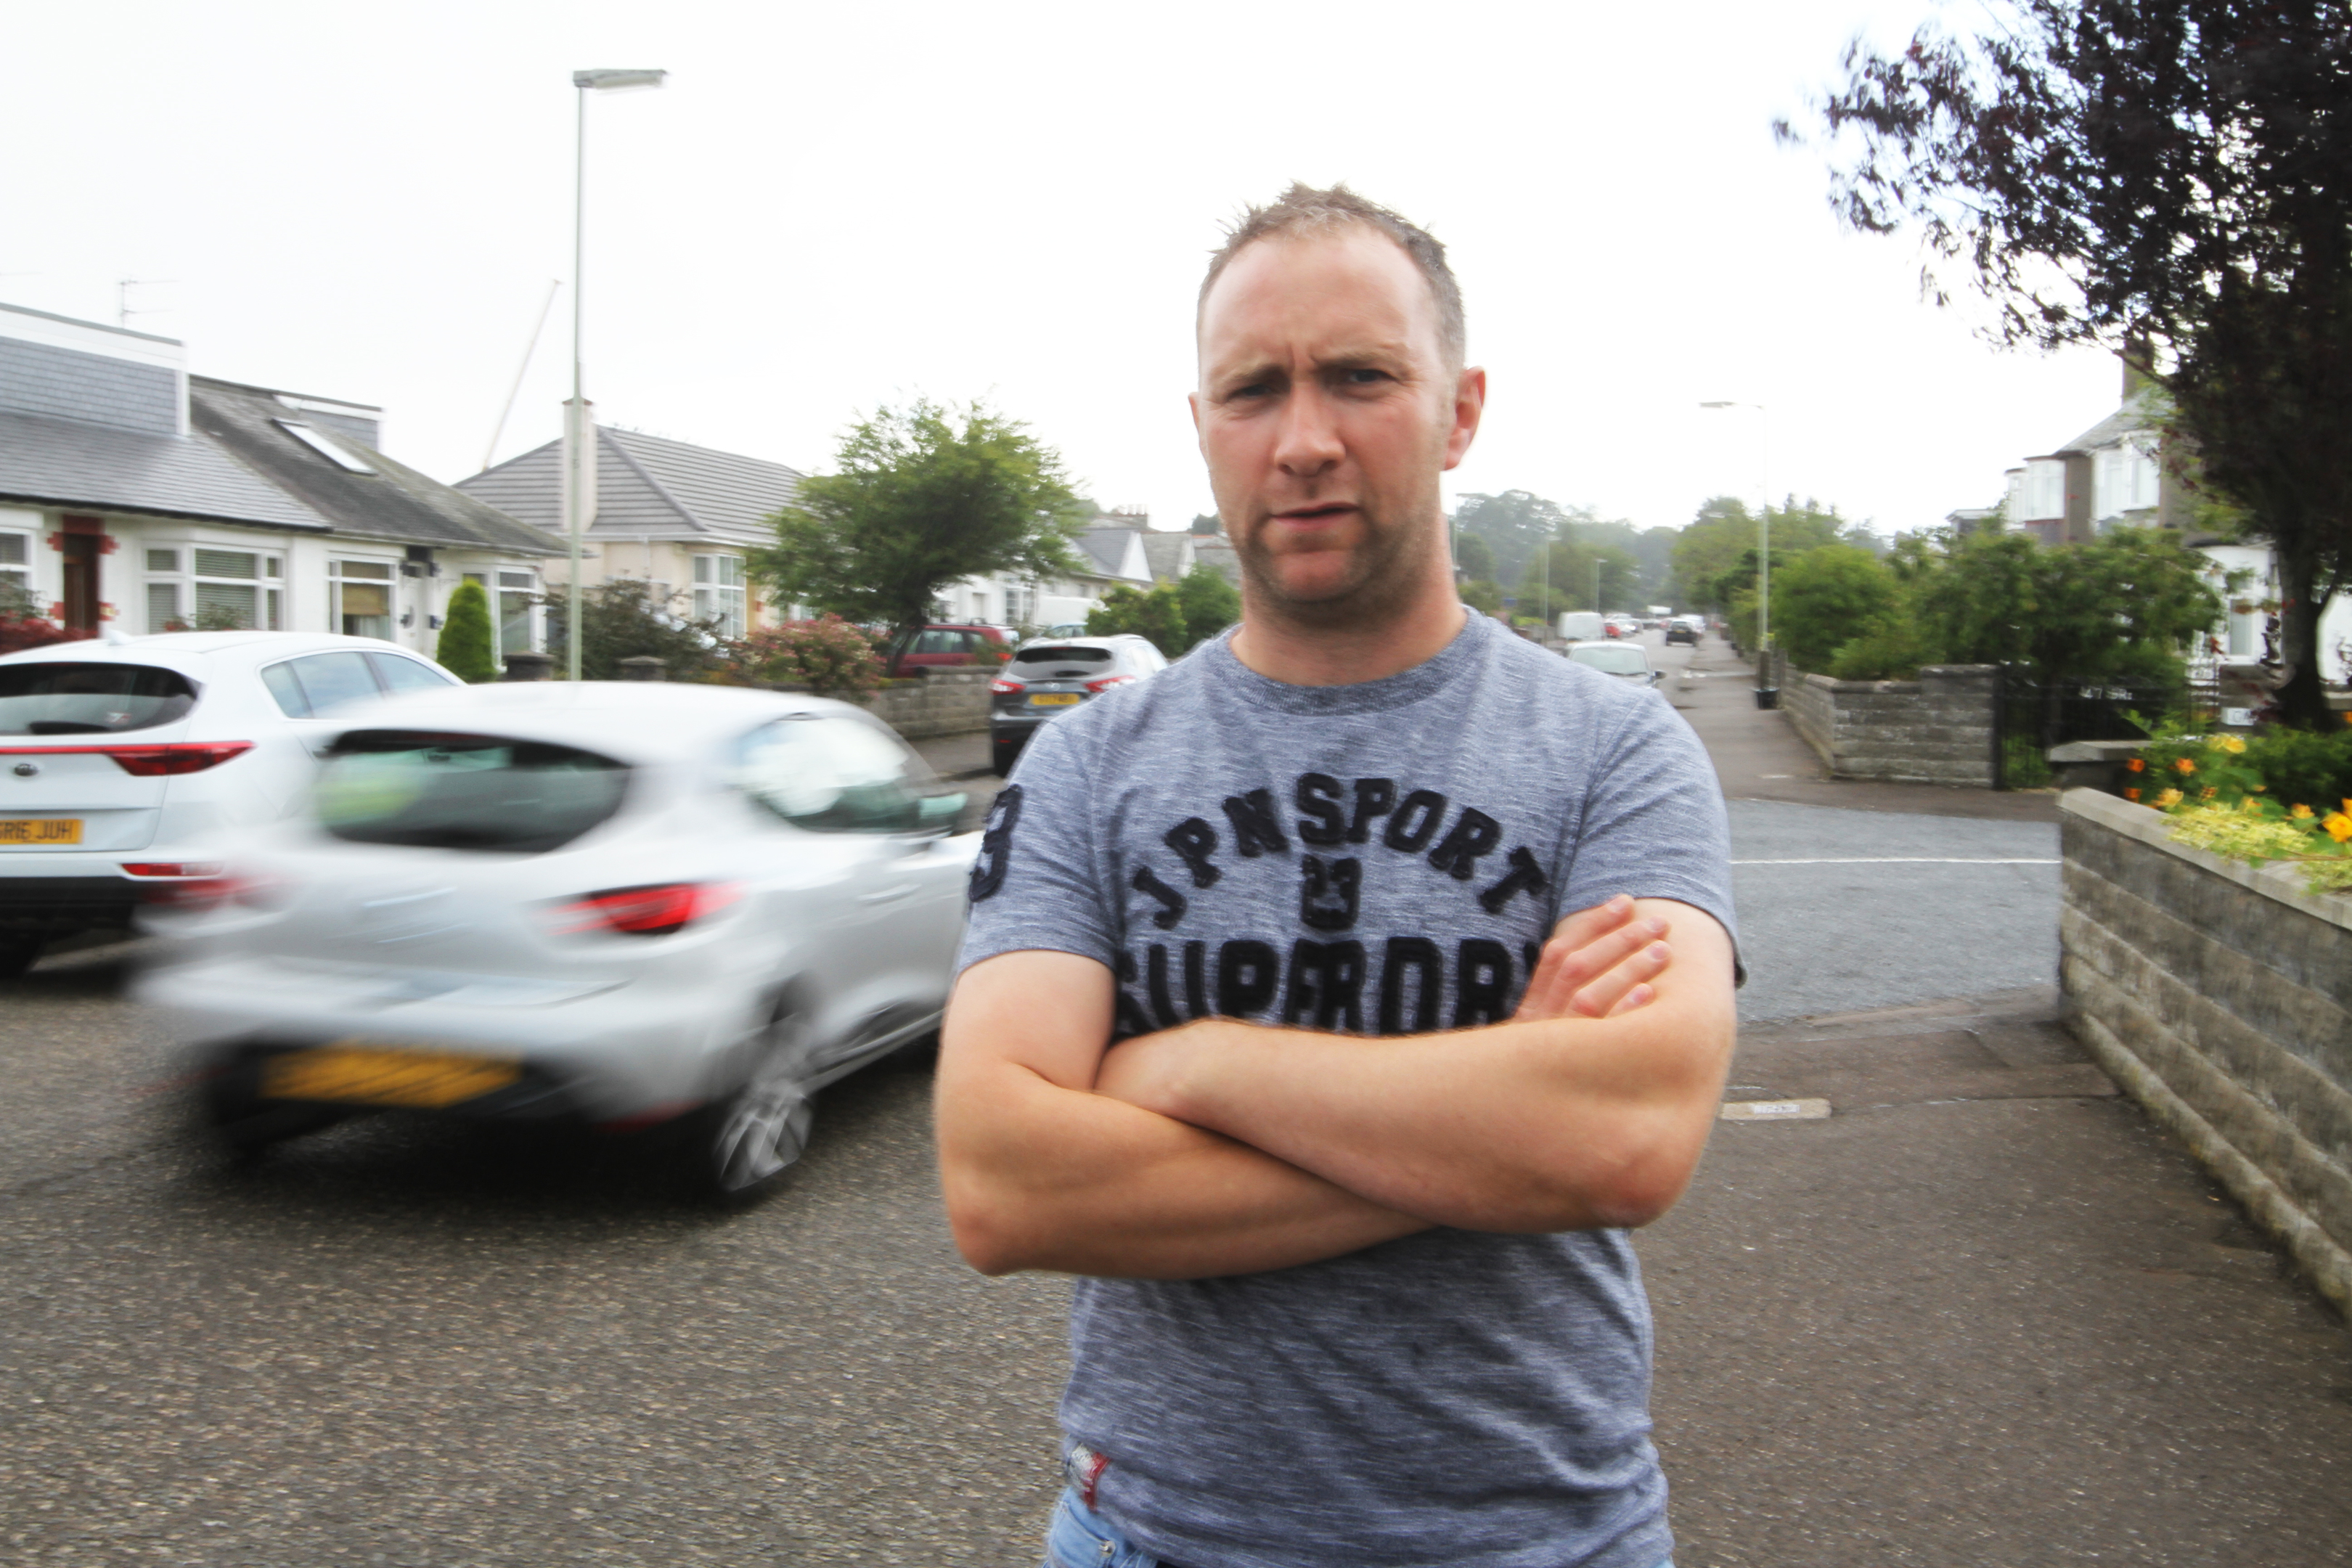 West School Road resident Ray McNally says he fears for his daughter's safety